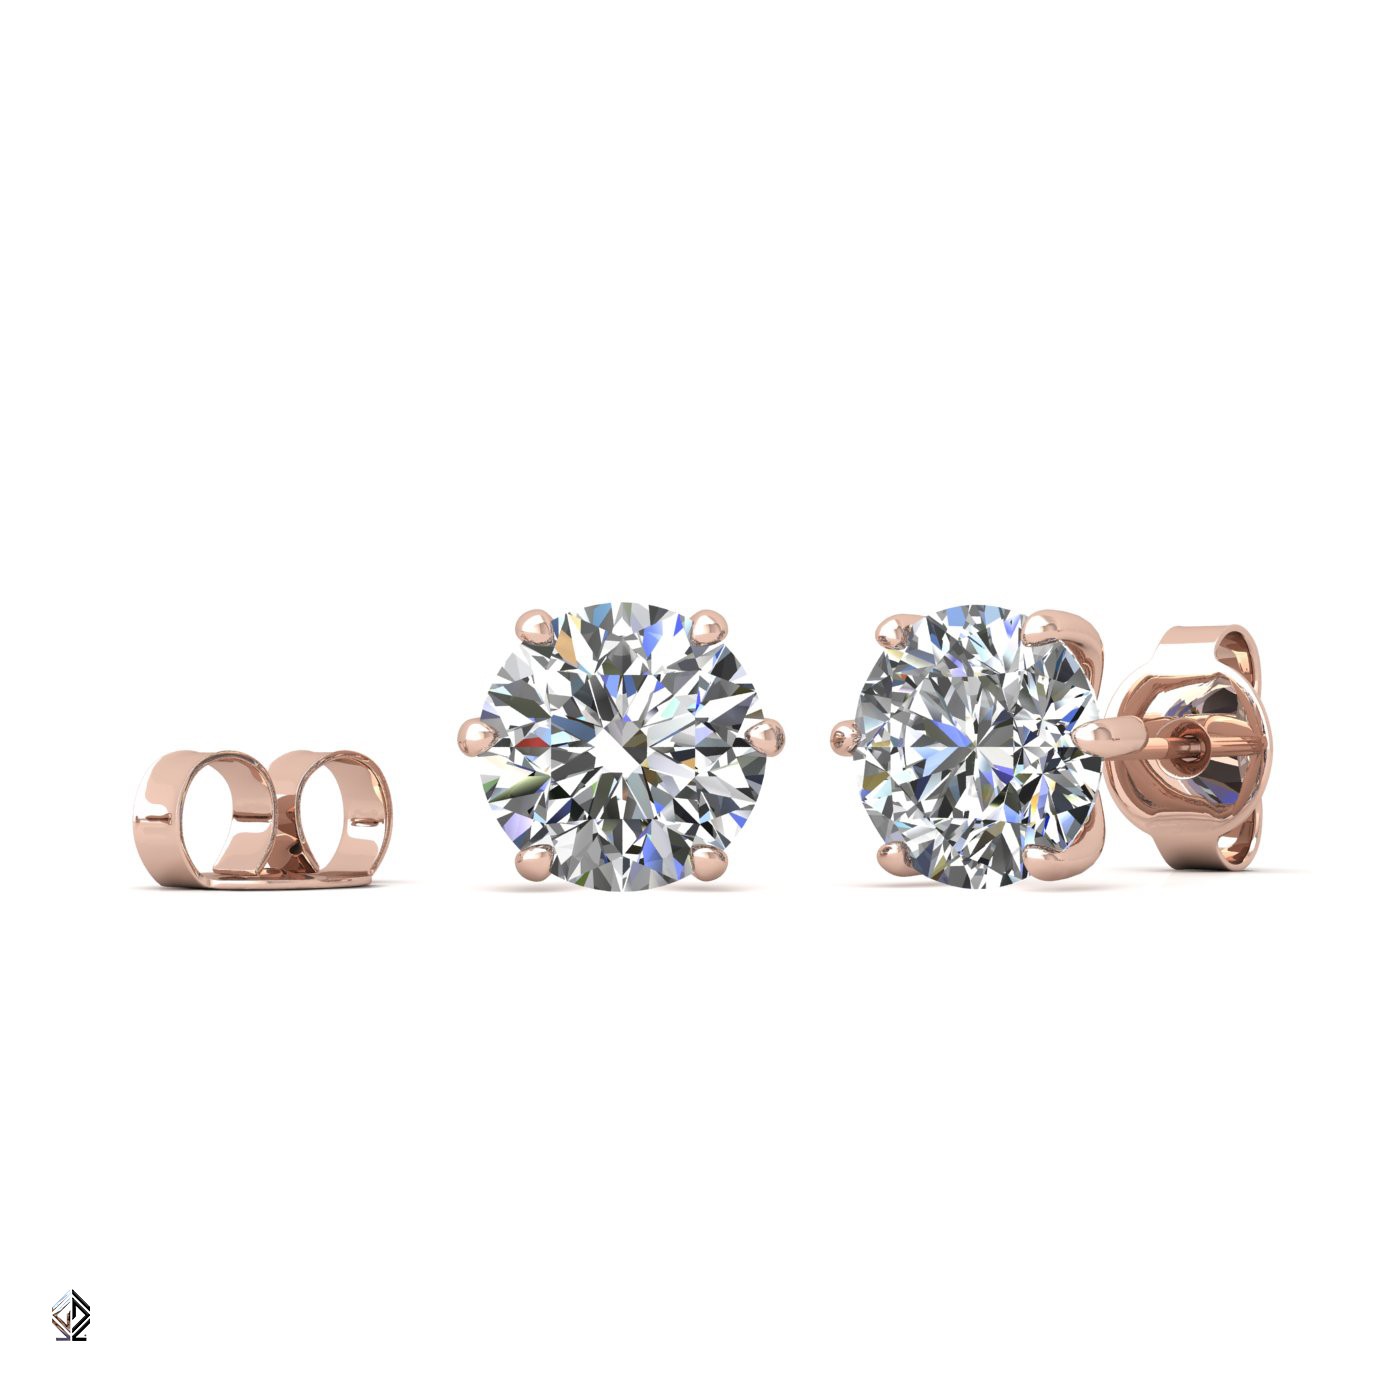 18k rose gold 2.0 ct each (4,0 tcw) 6 prongs round shape diamond earrings Photos & images